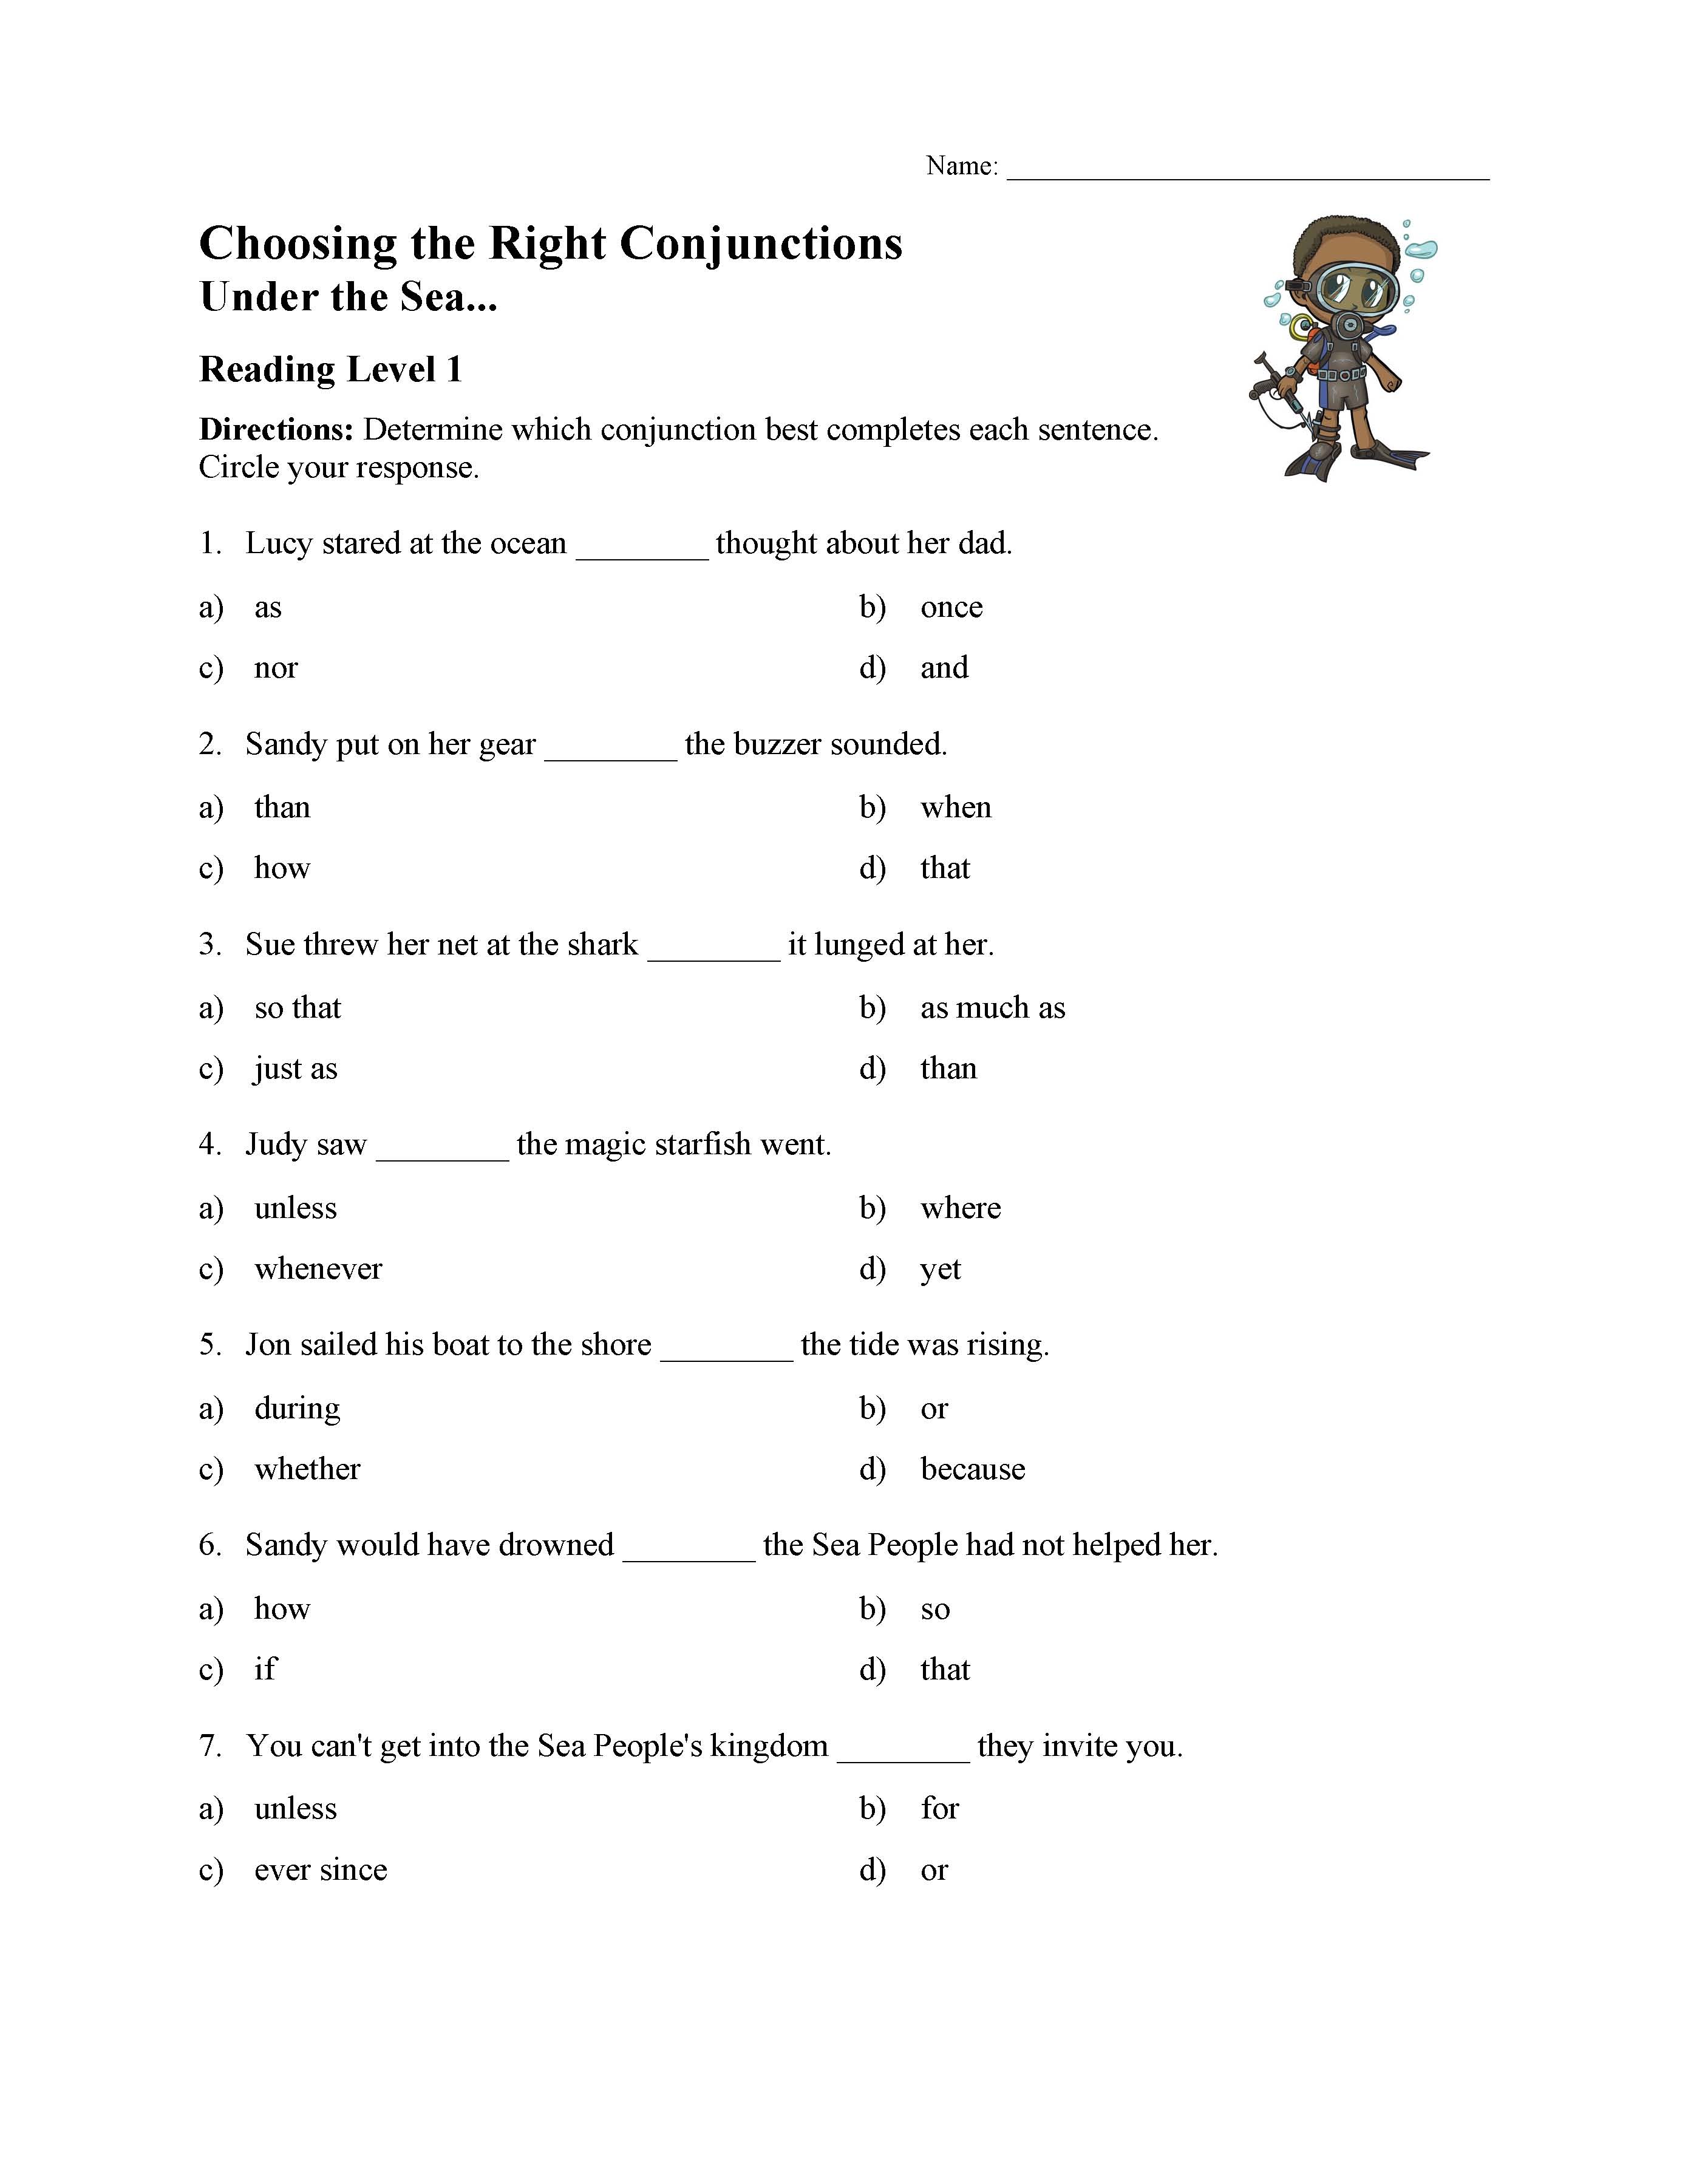 This is a preview image of the Choosing the Right Conjunction Worksheet - Reading Level 1.